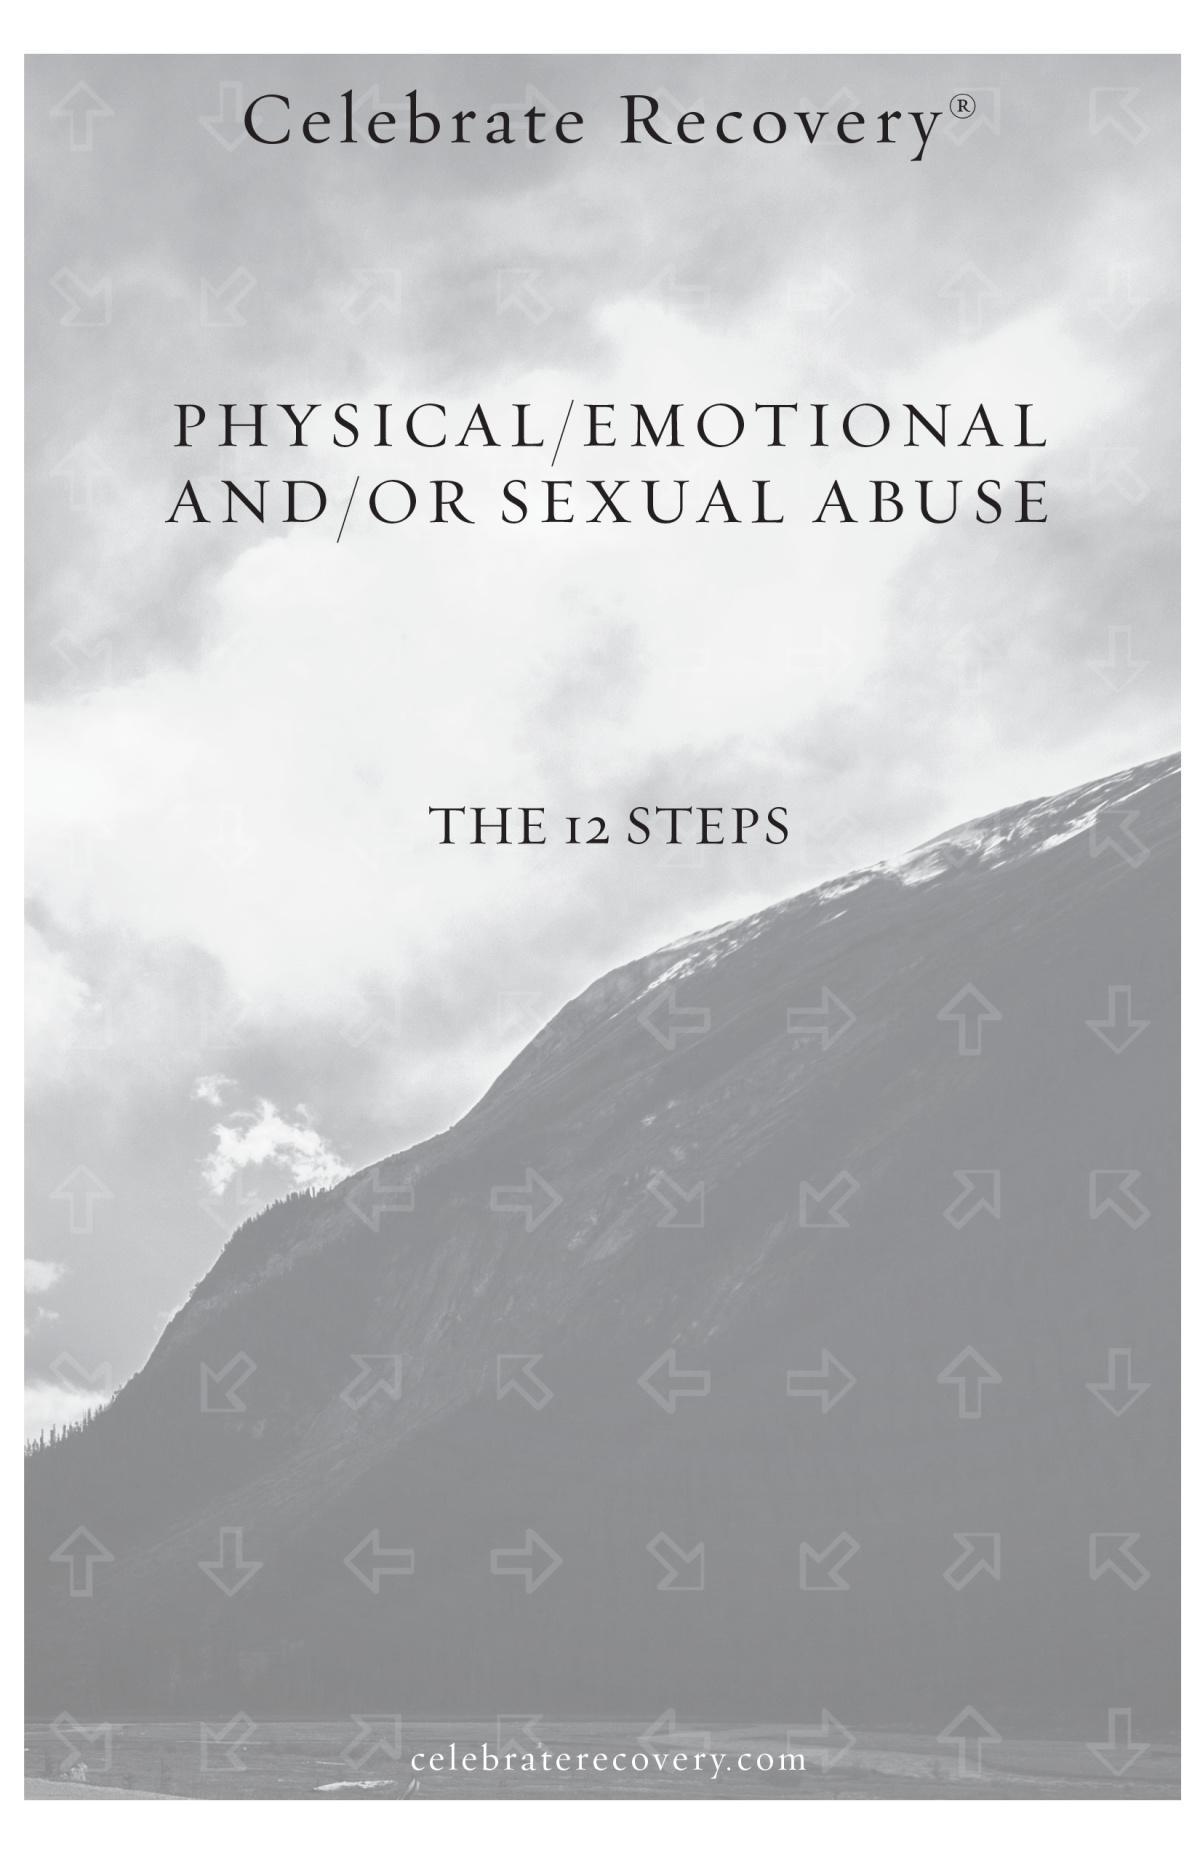 Physical/Emotional and/or Sexual Abuse - 12 Steps